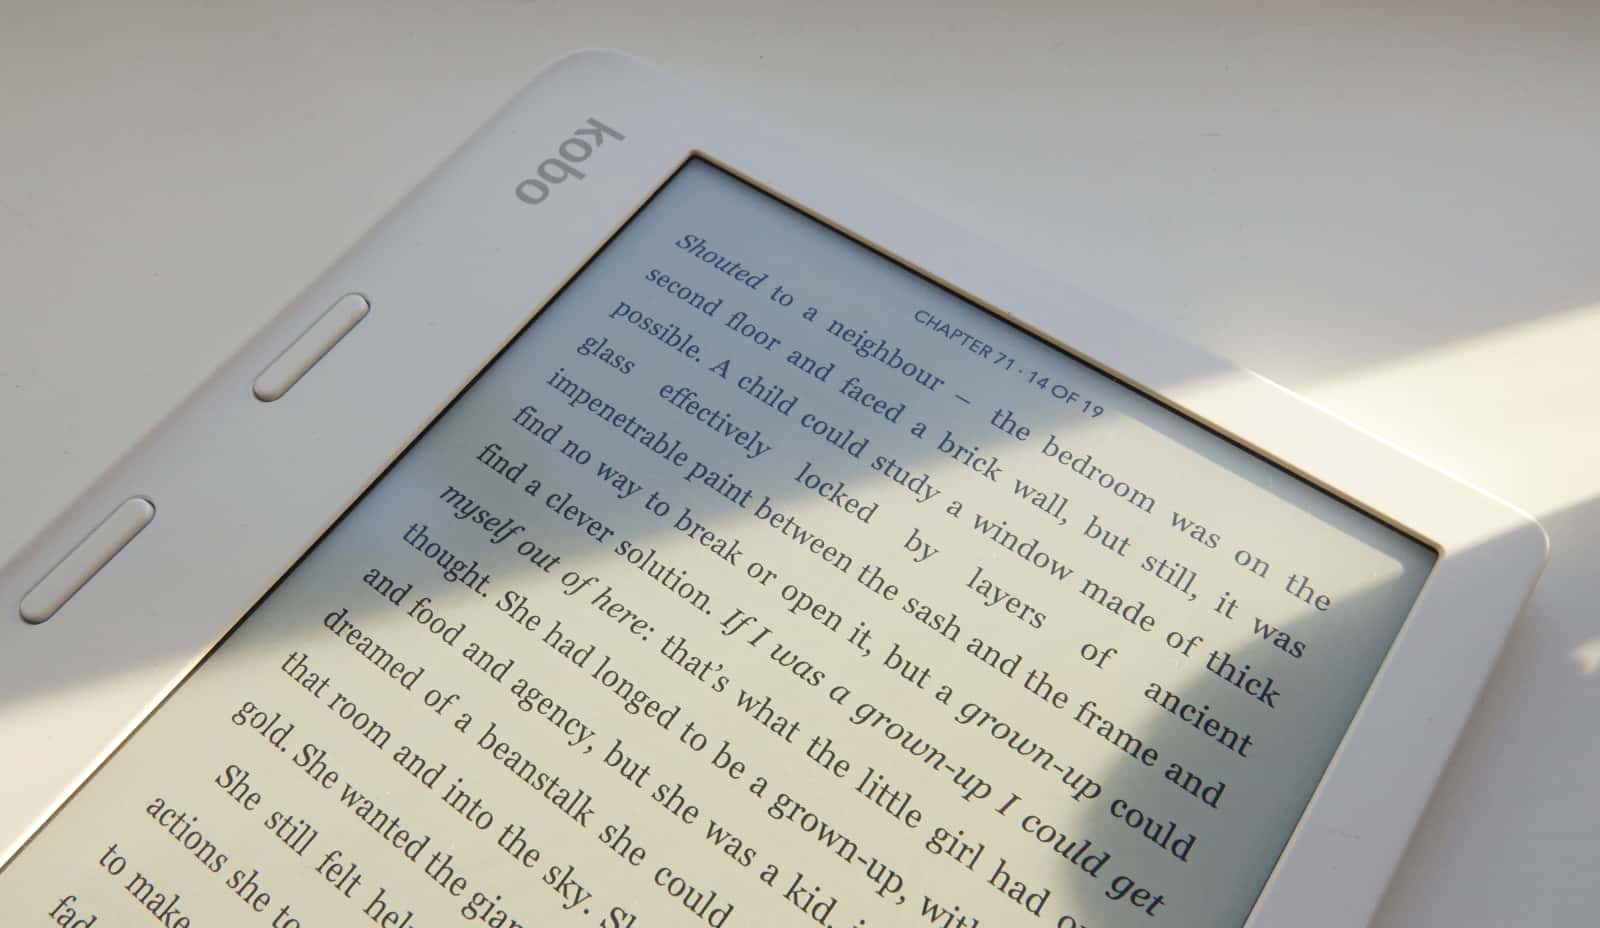 Review: The Kobo Libra 2 Changed My Mind About E-Readers